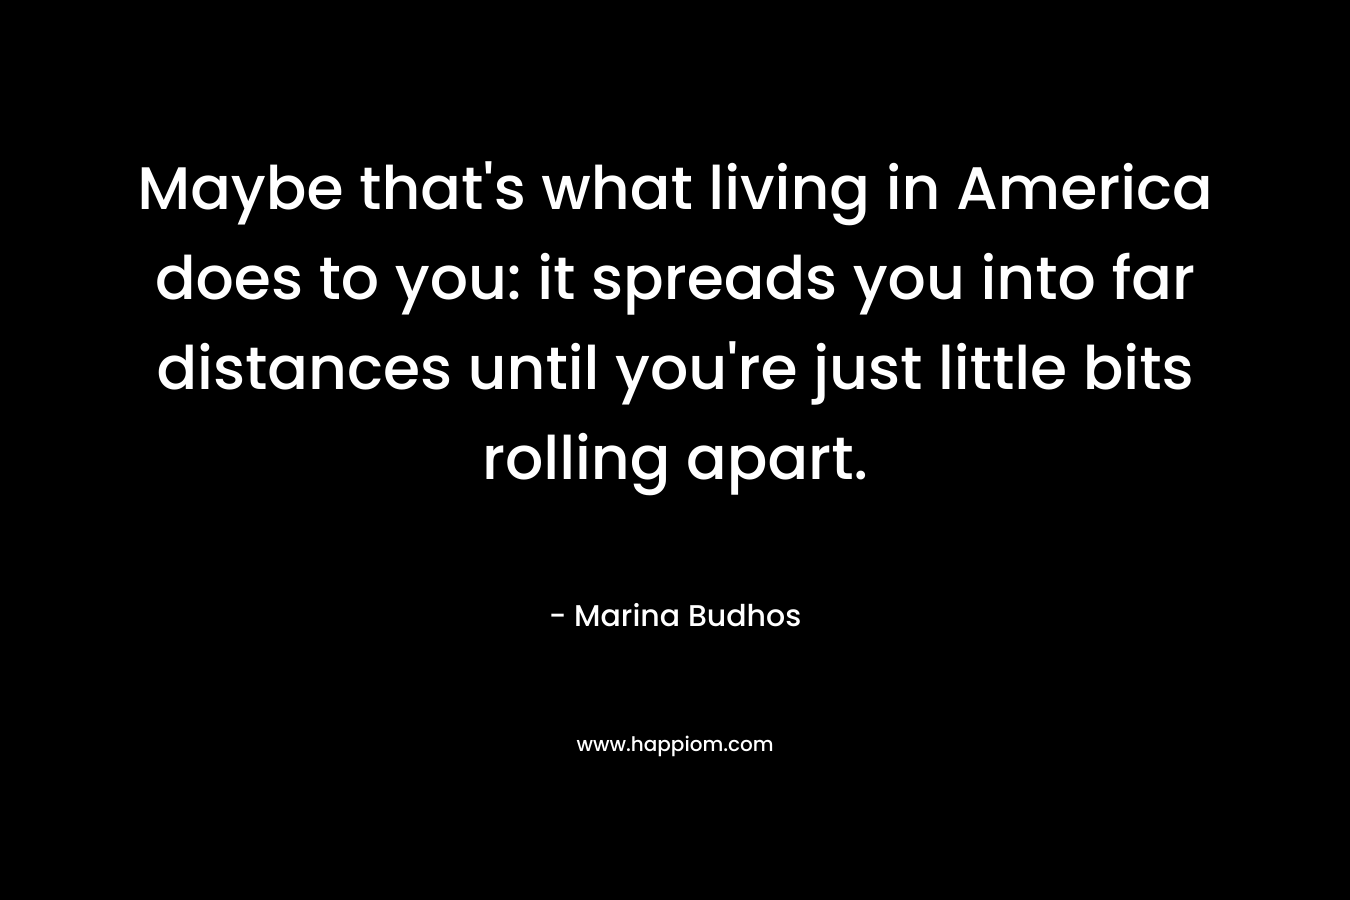 Maybe that’s what living in America does to you: it spreads you into far distances until you’re just little bits rolling apart. – Marina Budhos